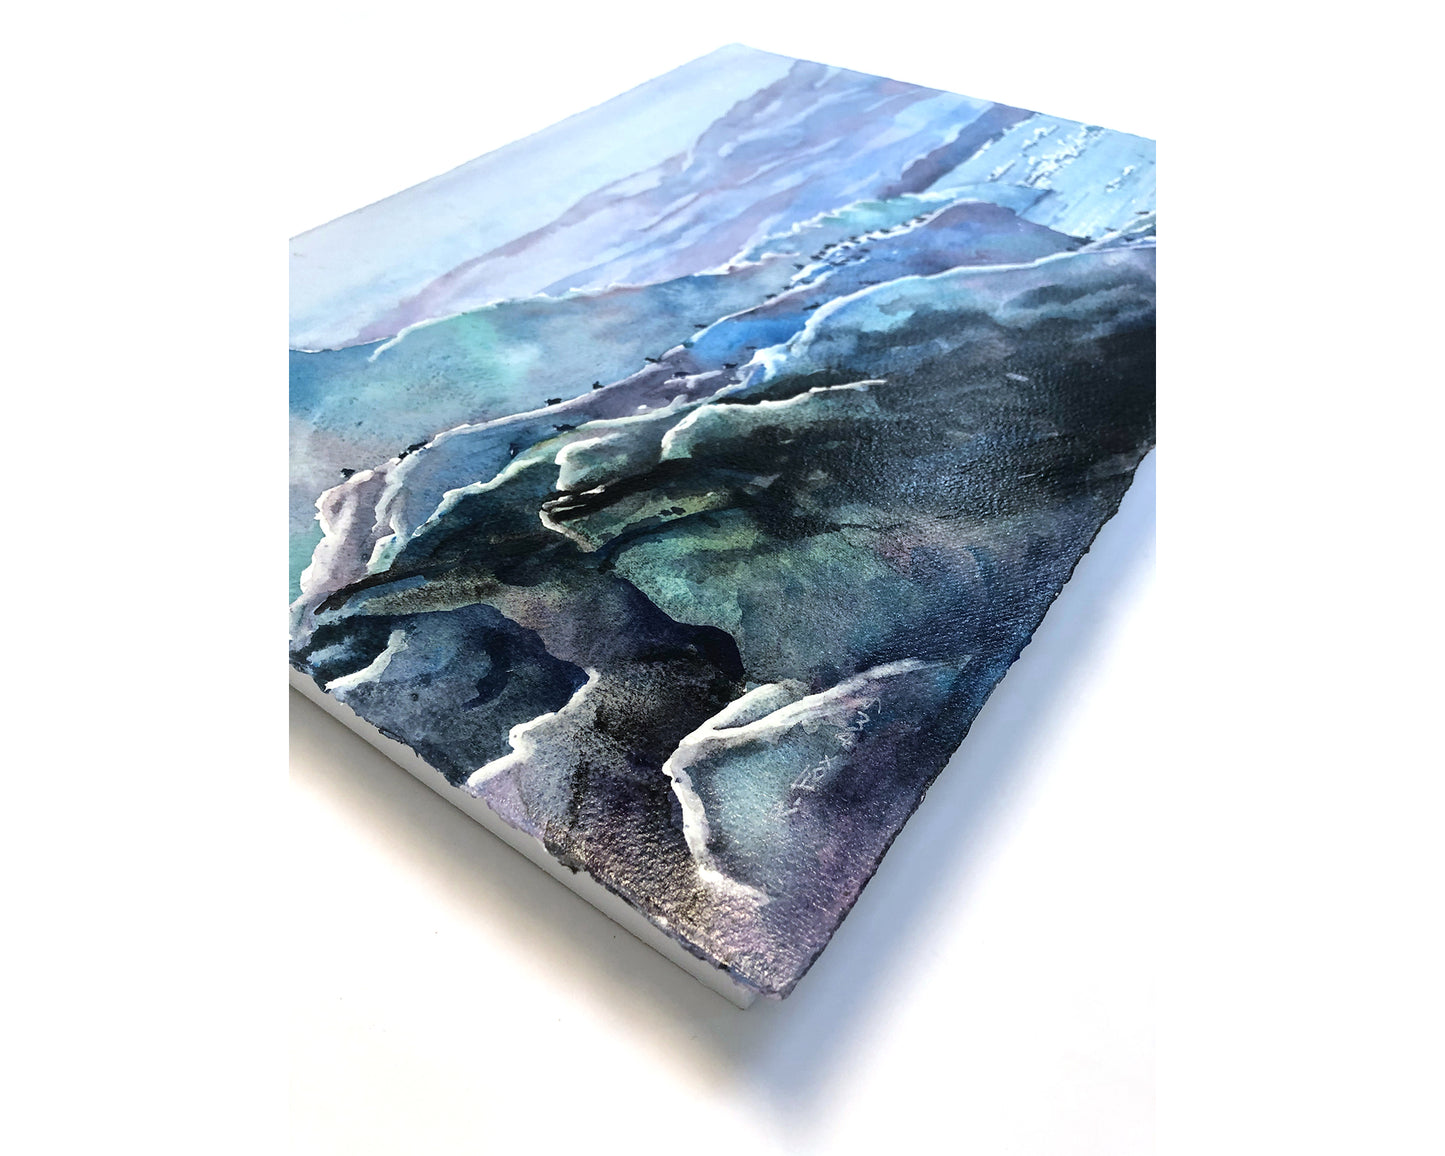 Colorful home art Iceland landscape painting, glacier icebergs melting watercolor painting. Iceland home decor Icelandic home decor (original)